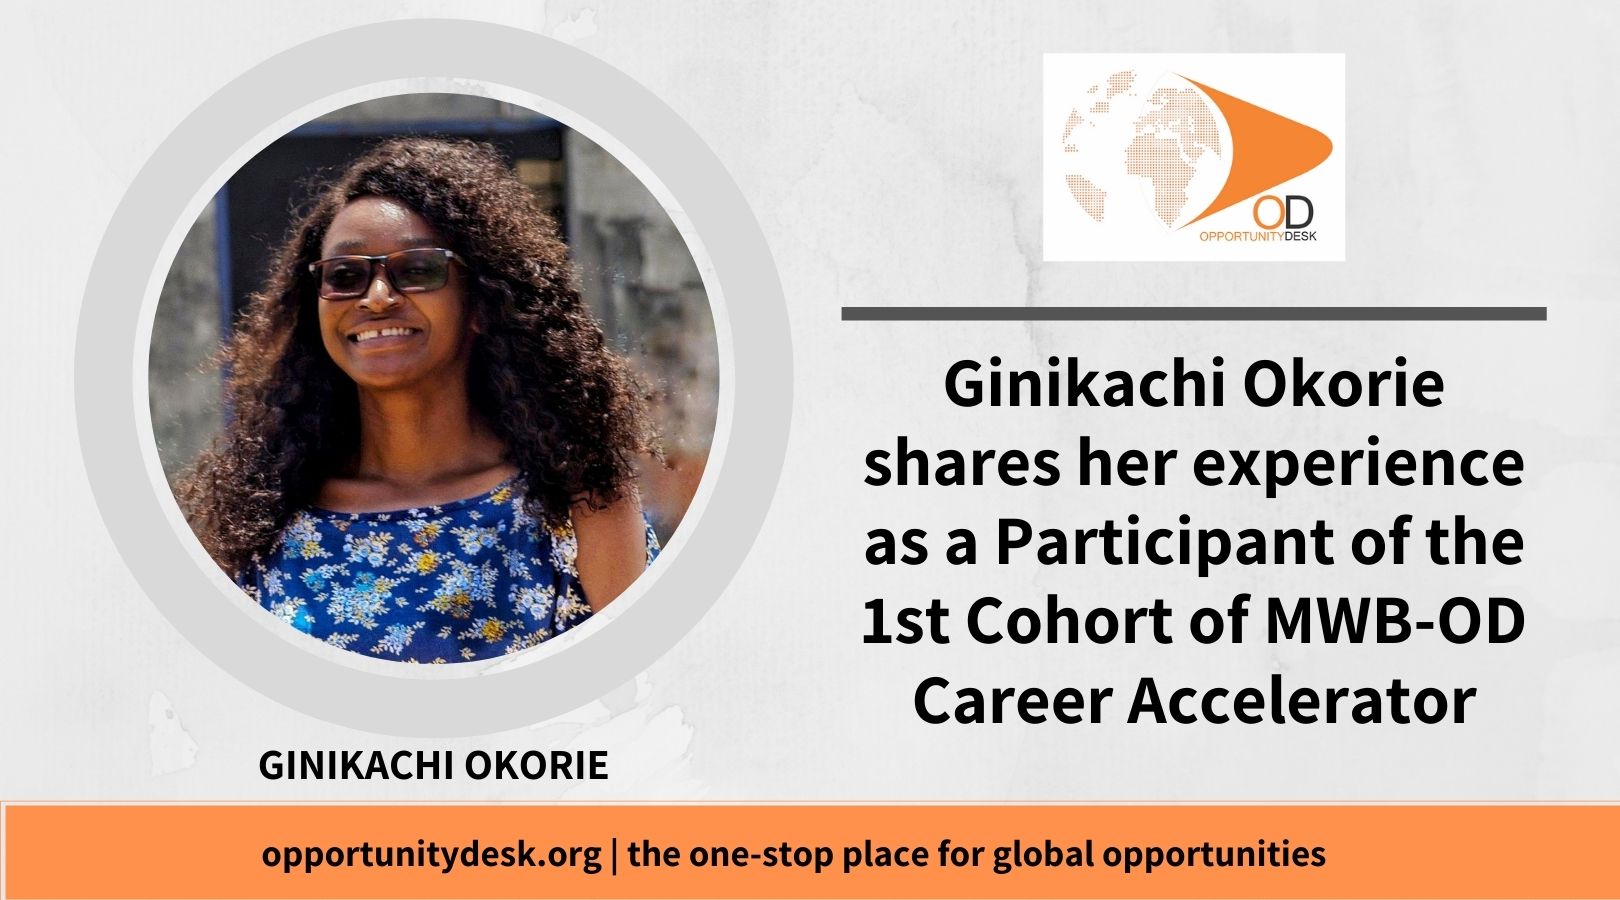 Ginikachi Okorie shares her experience as a Participant of the 1st Cohort of MWB-OD Career Accelerator Program + Tips